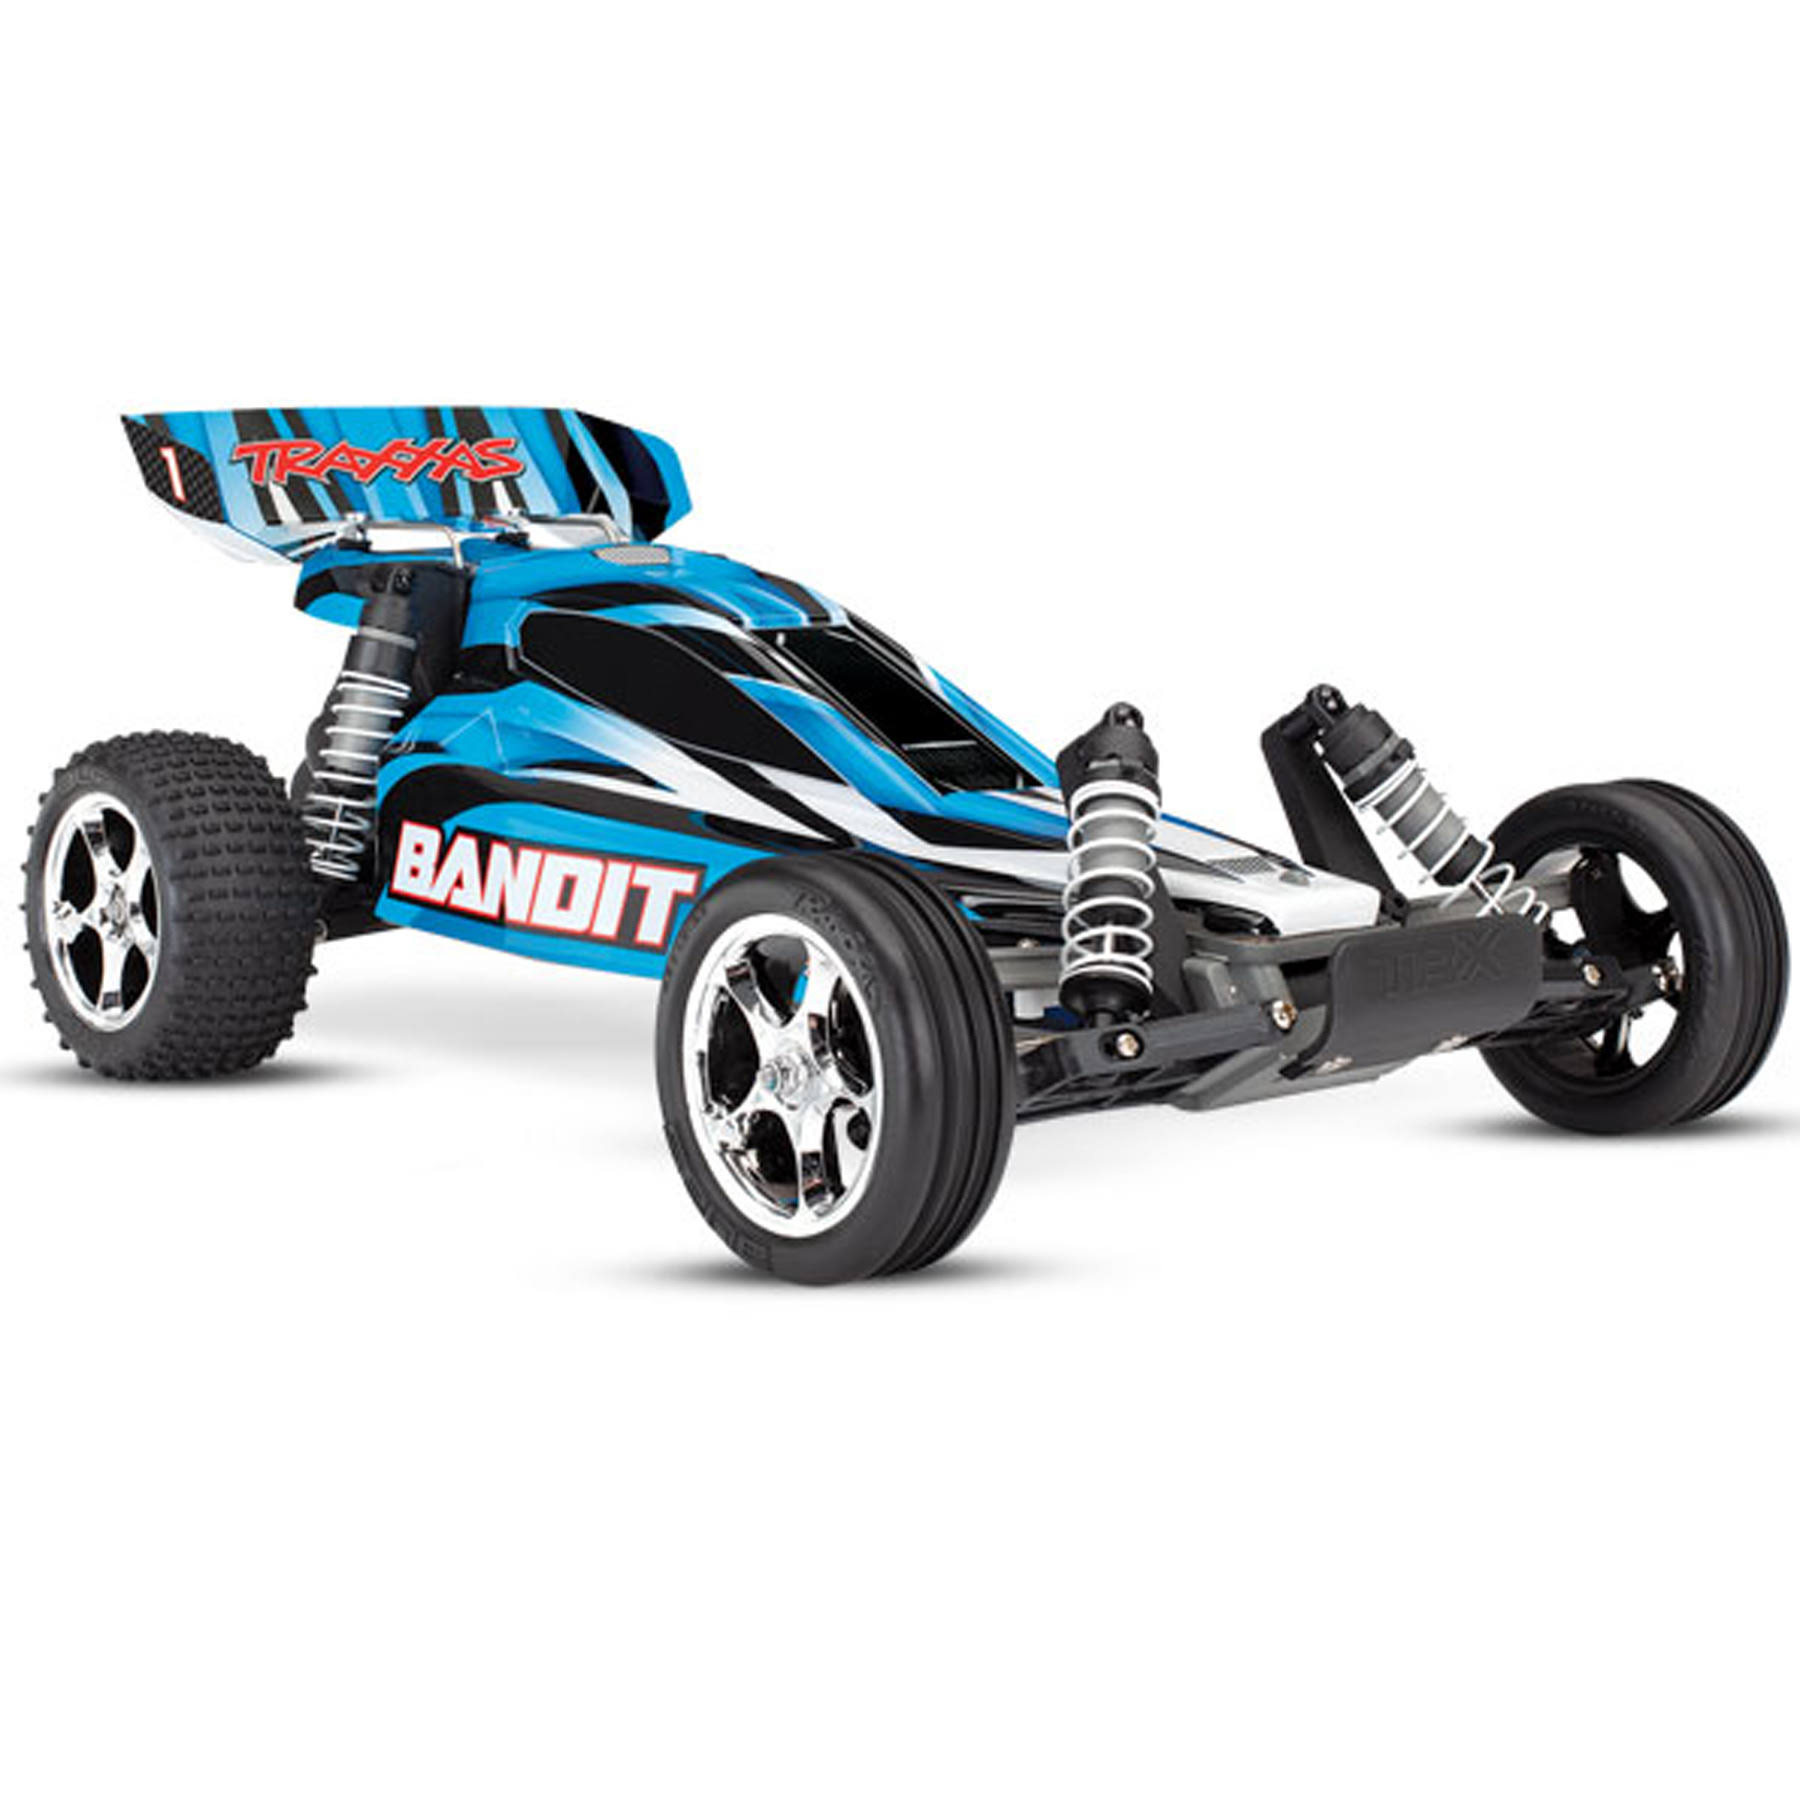 Traxxas Bandit: 1/10 Scale Off-Road Buggy - Blue